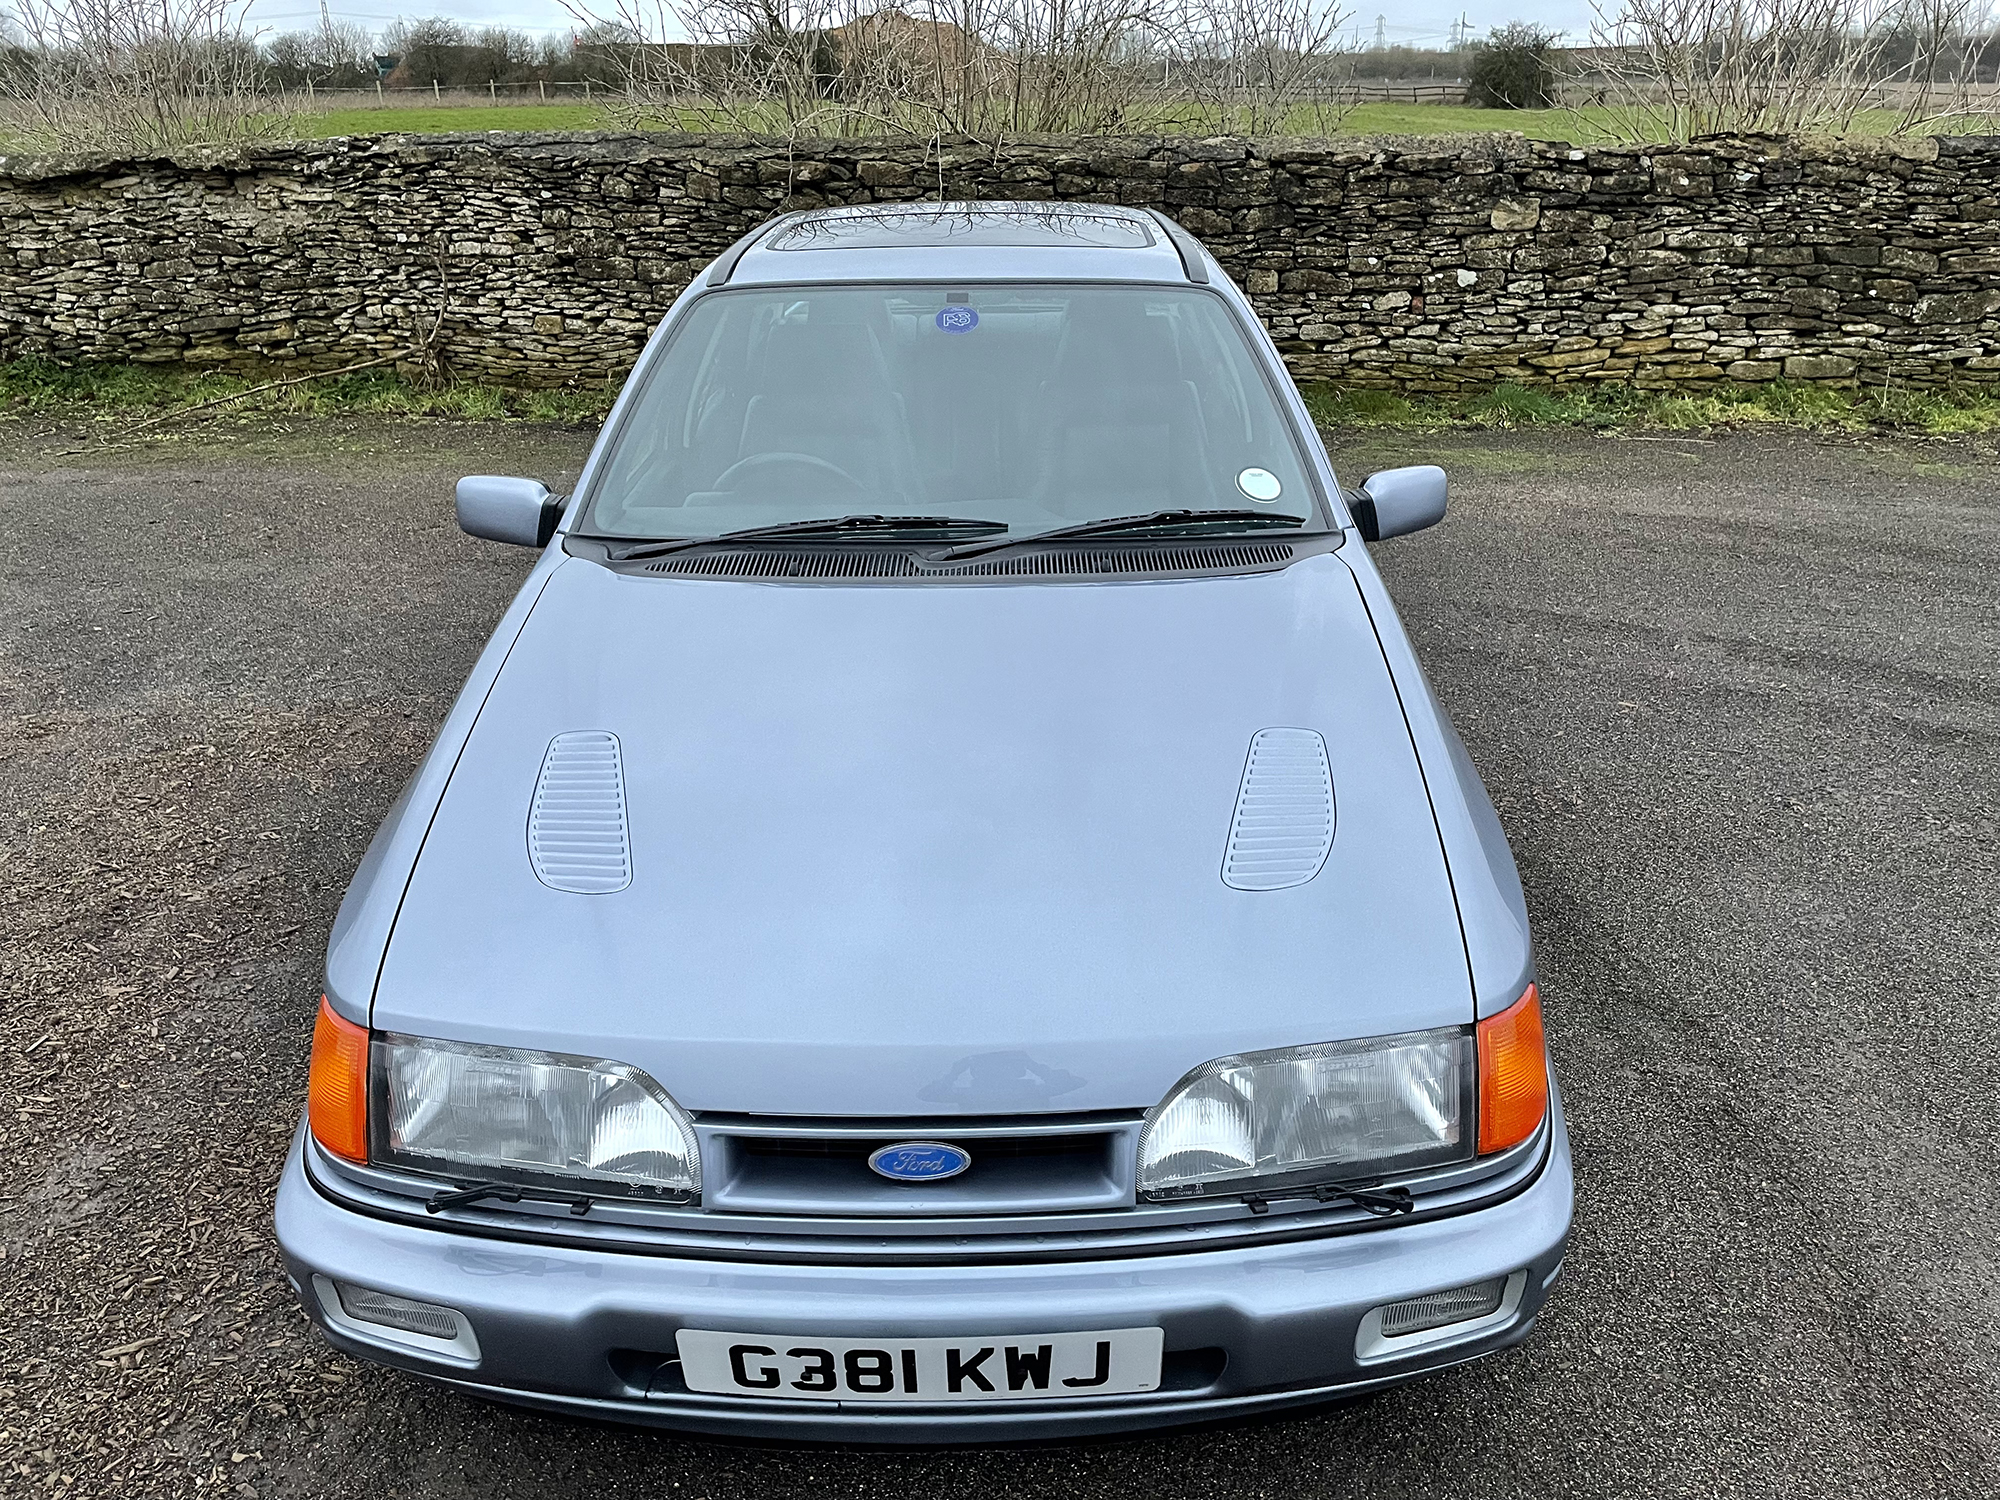 1989 Ford Sierra RS Cosworth Reg. no. G381 KWJ Chassis no. WF0FXXGBBFKR01249 - Image 2 of 26